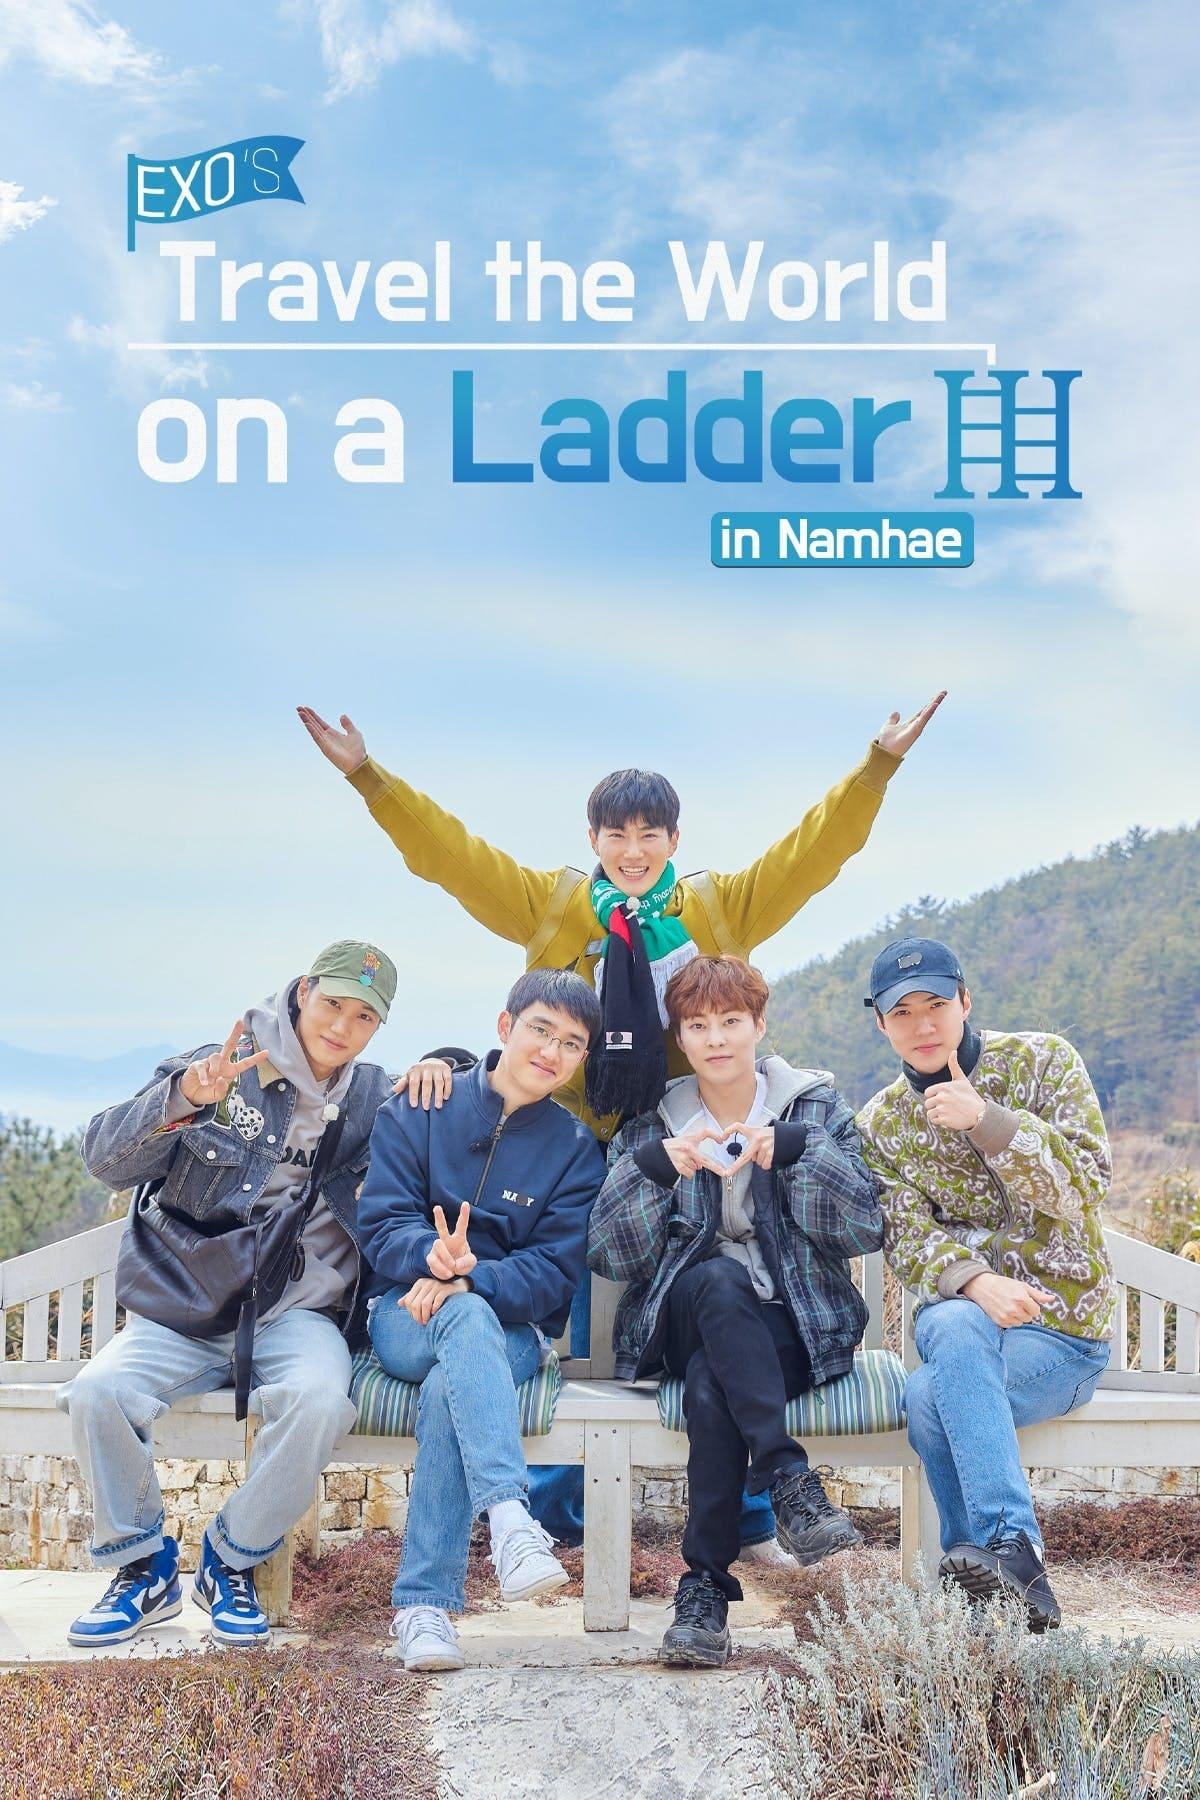 EXO's Travel the World on a Ladder poster